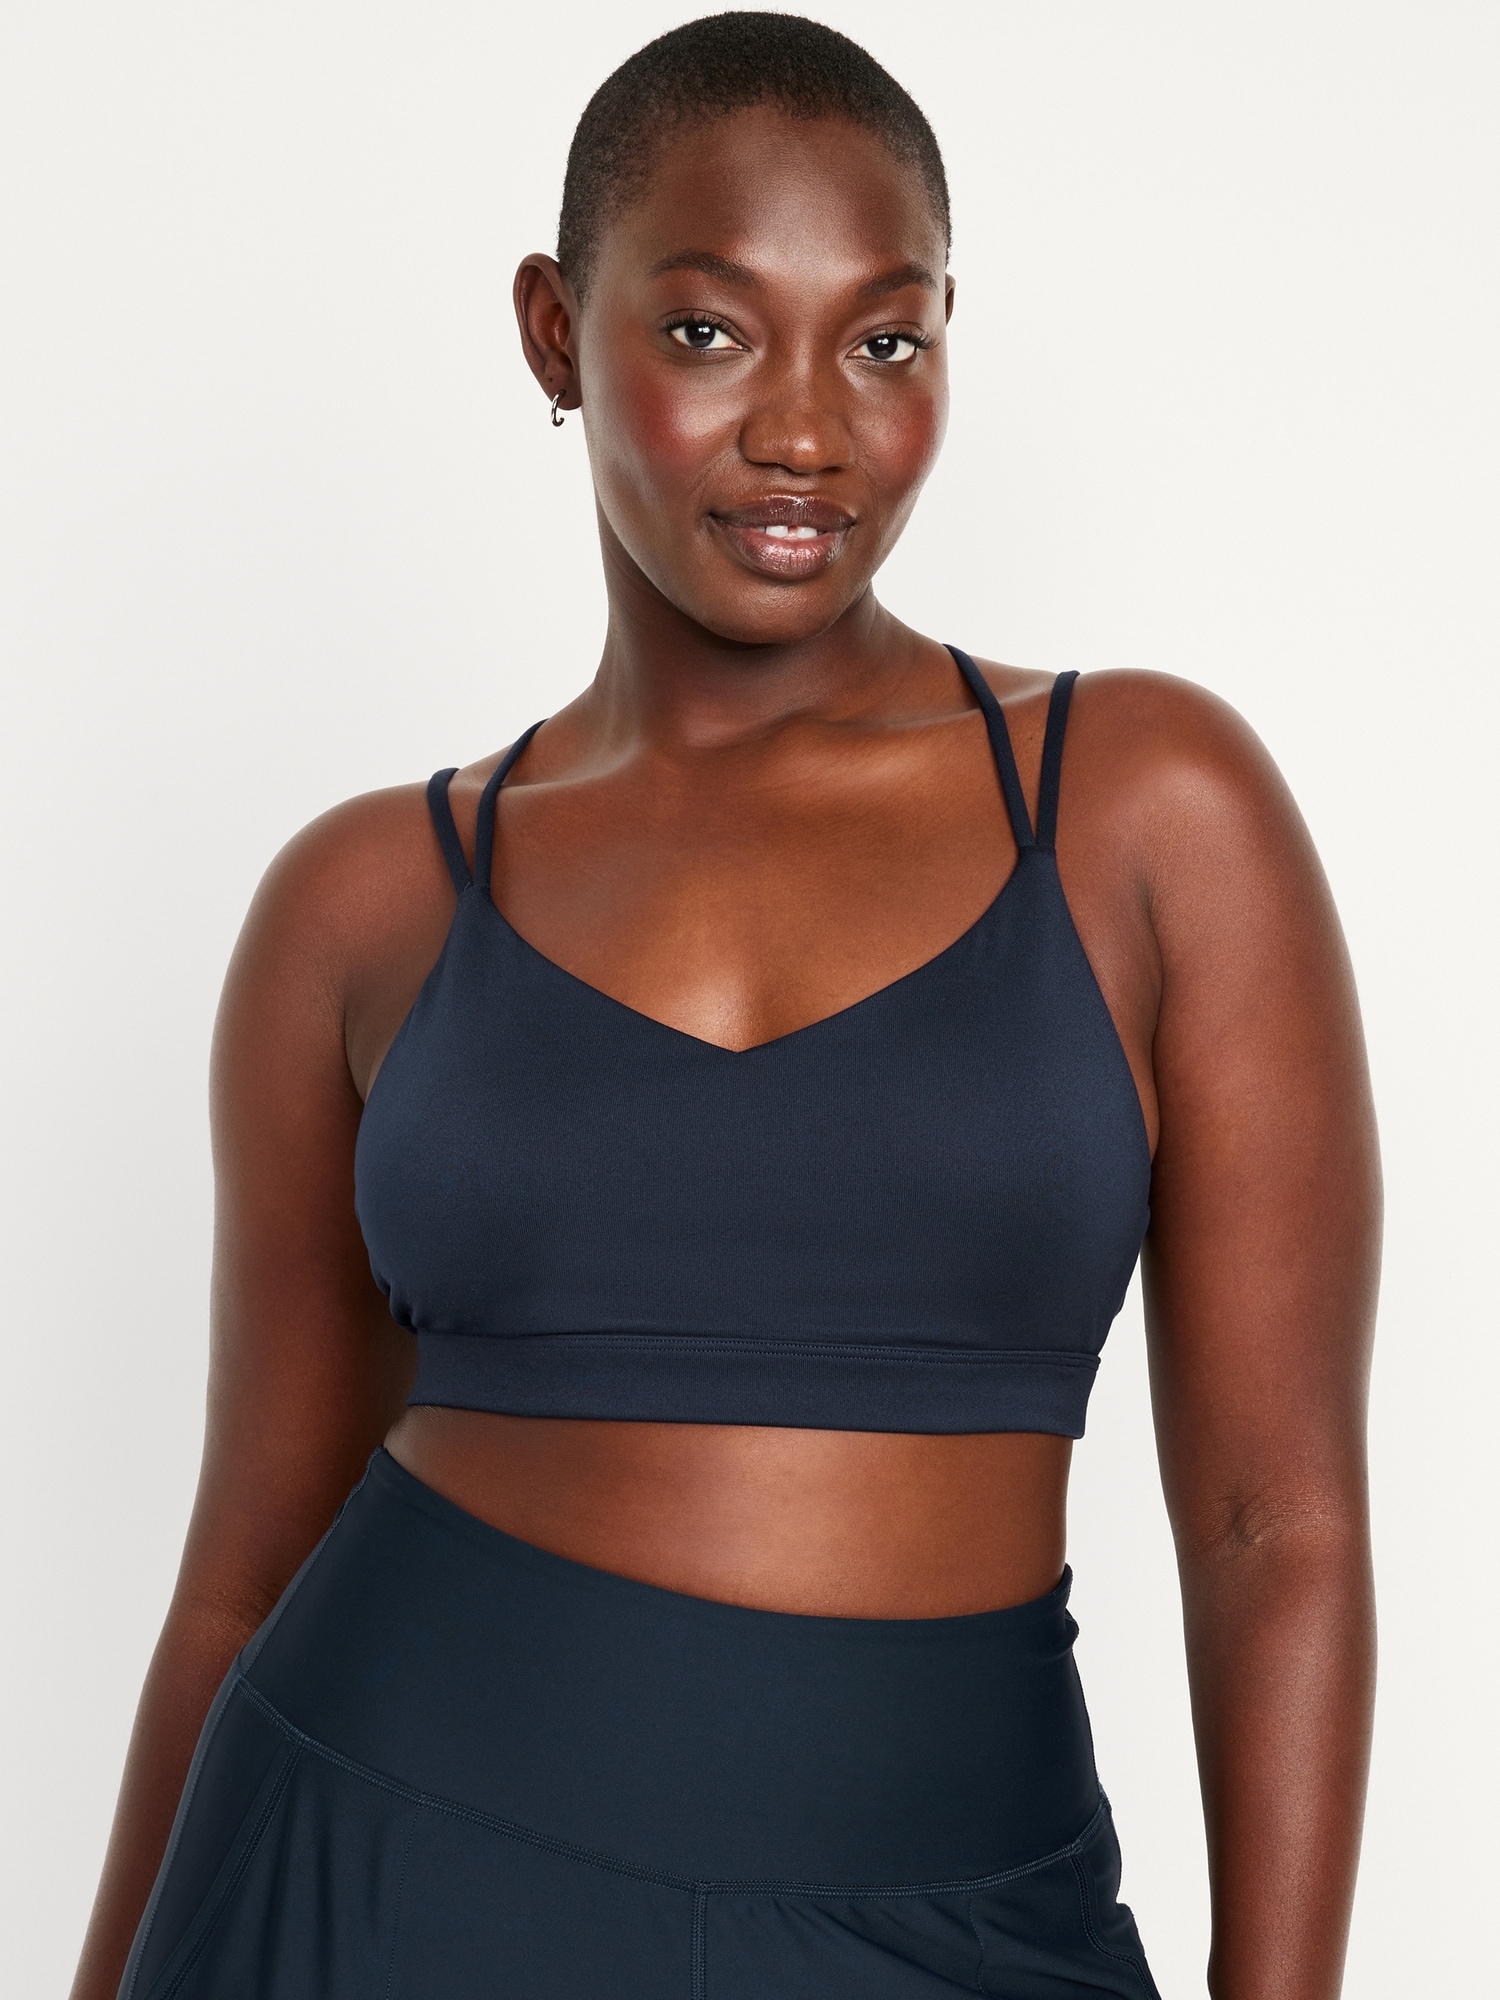 GUESS Women's Active Stretch Jersey Sports Bra